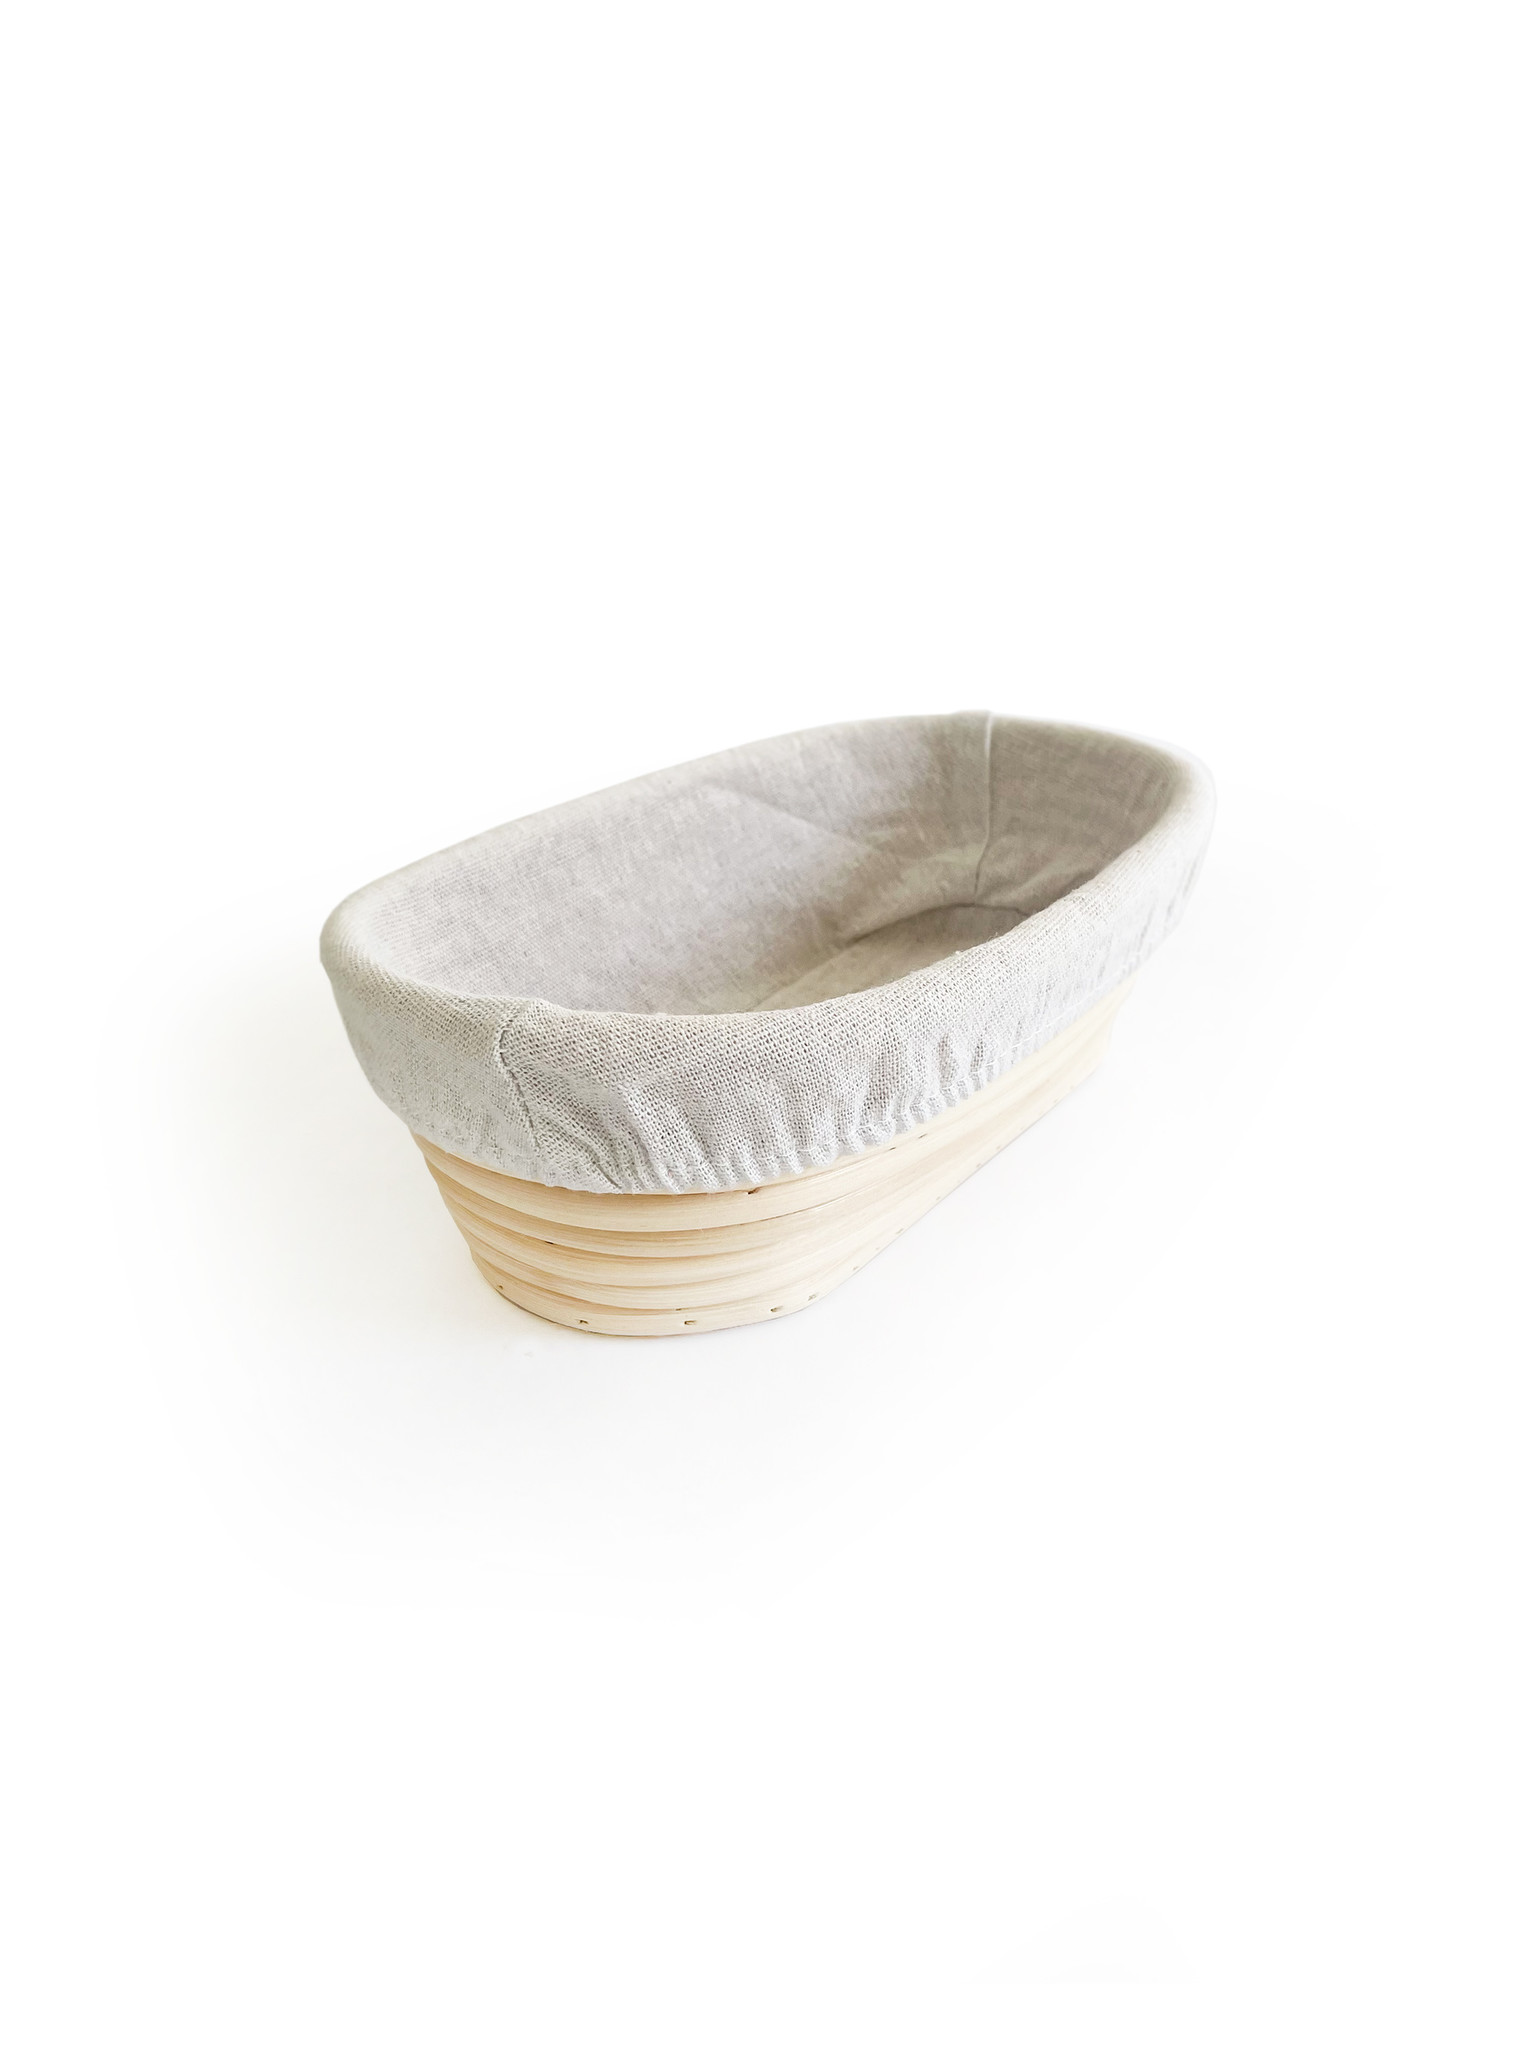 Mrs. Anderson's Lined Oval Bread Proofing Basket, 9.5" x 6"-2